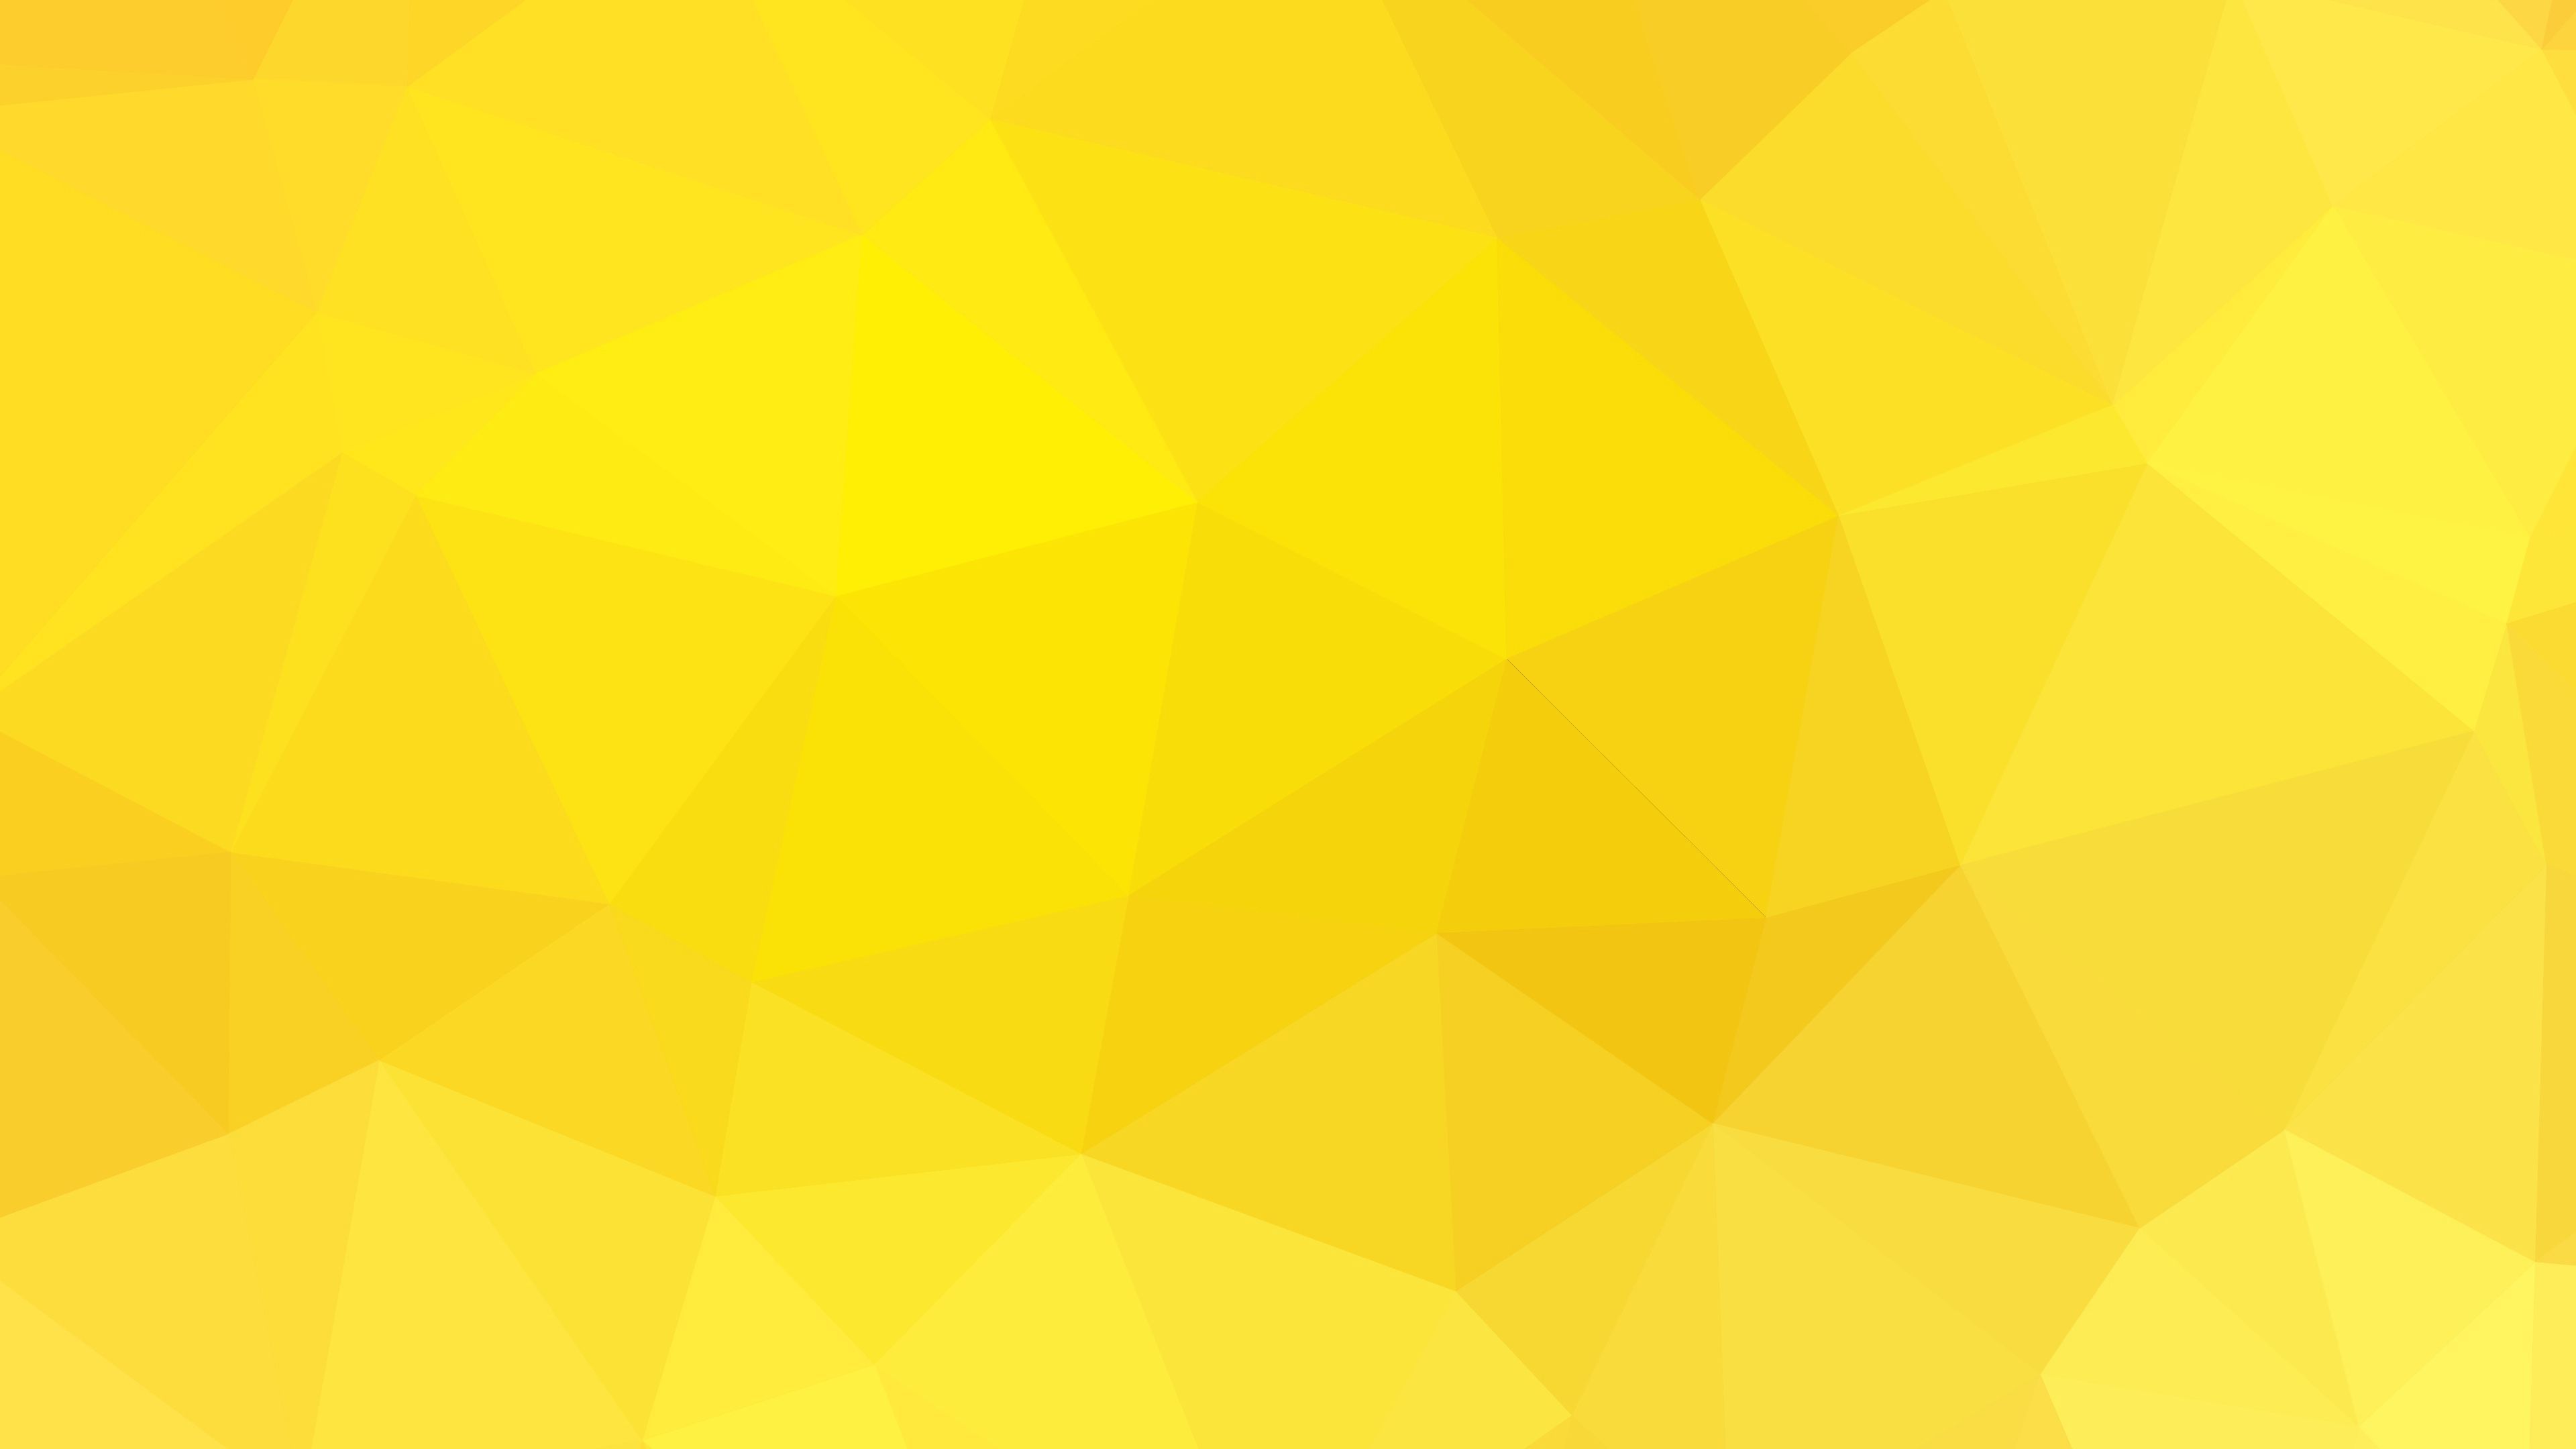 Download wallpaper 3840x2160 polygonal, triangles, shades, yellow